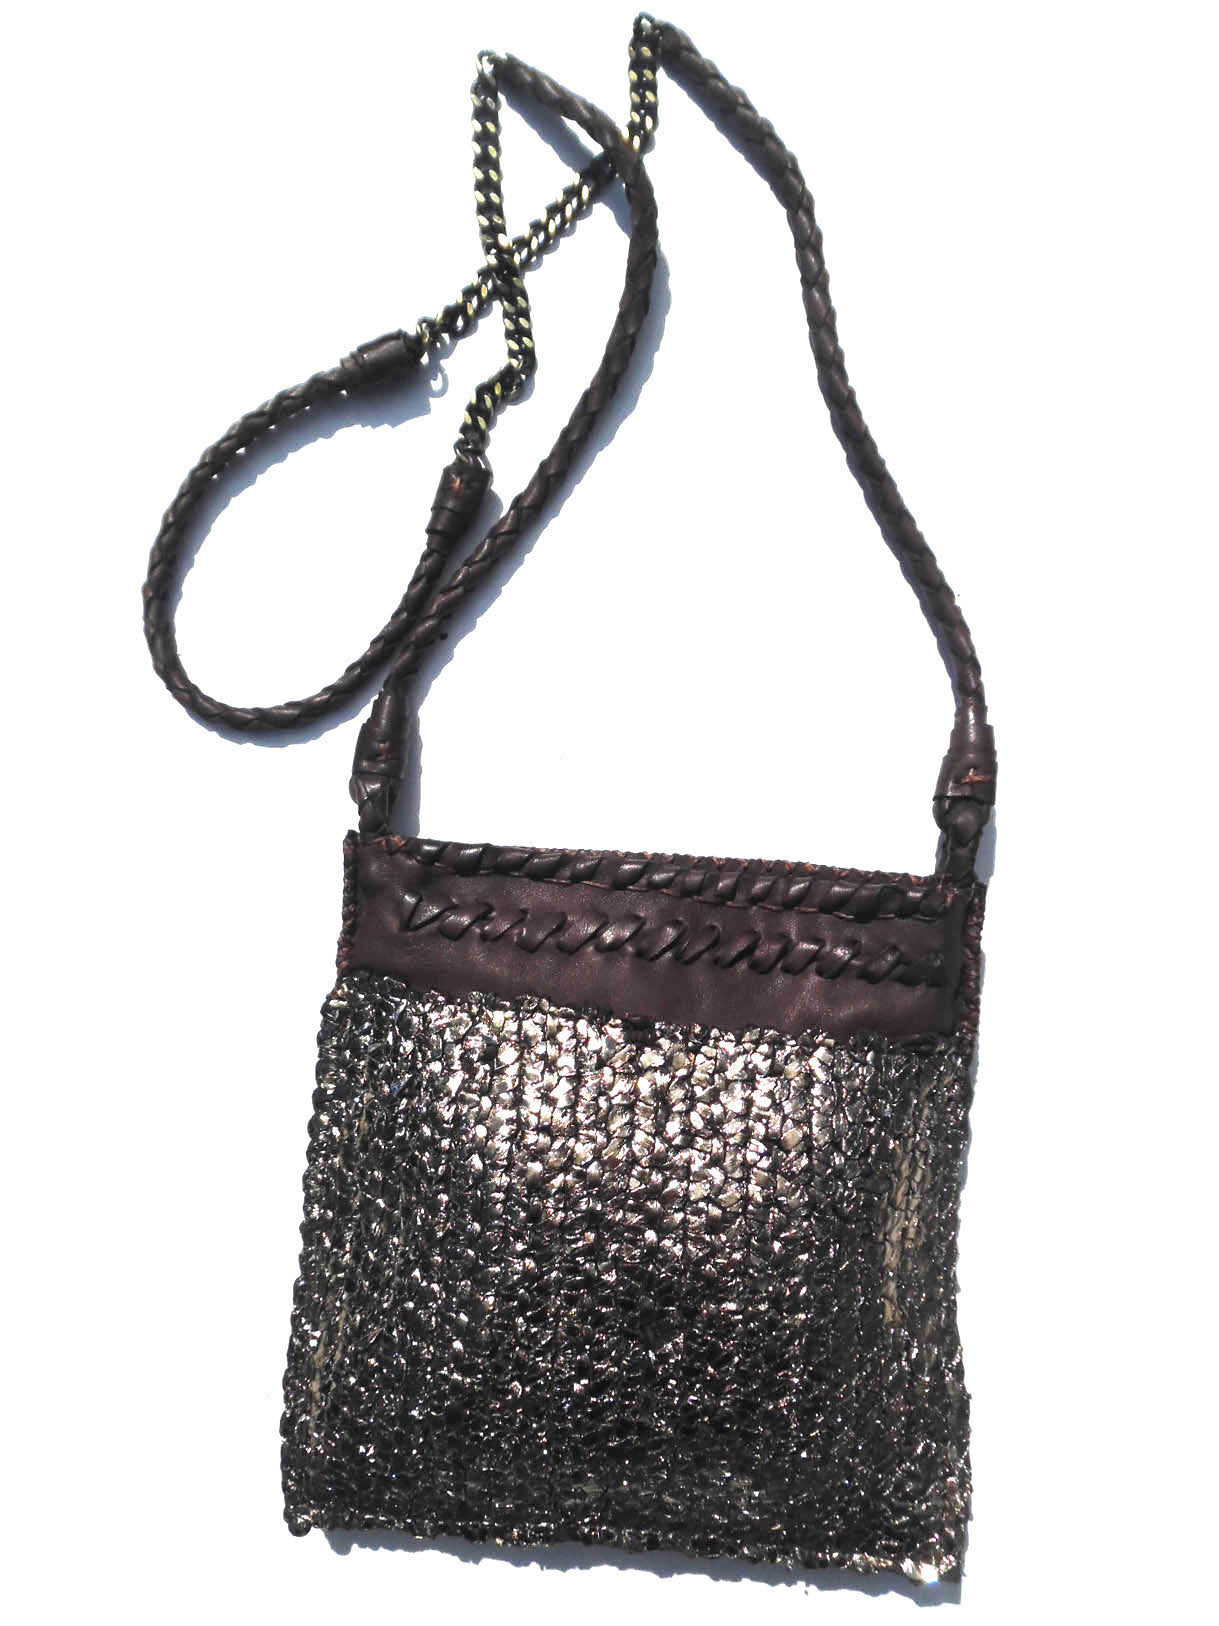 Tricot Woven Leather Square Evening Pouch